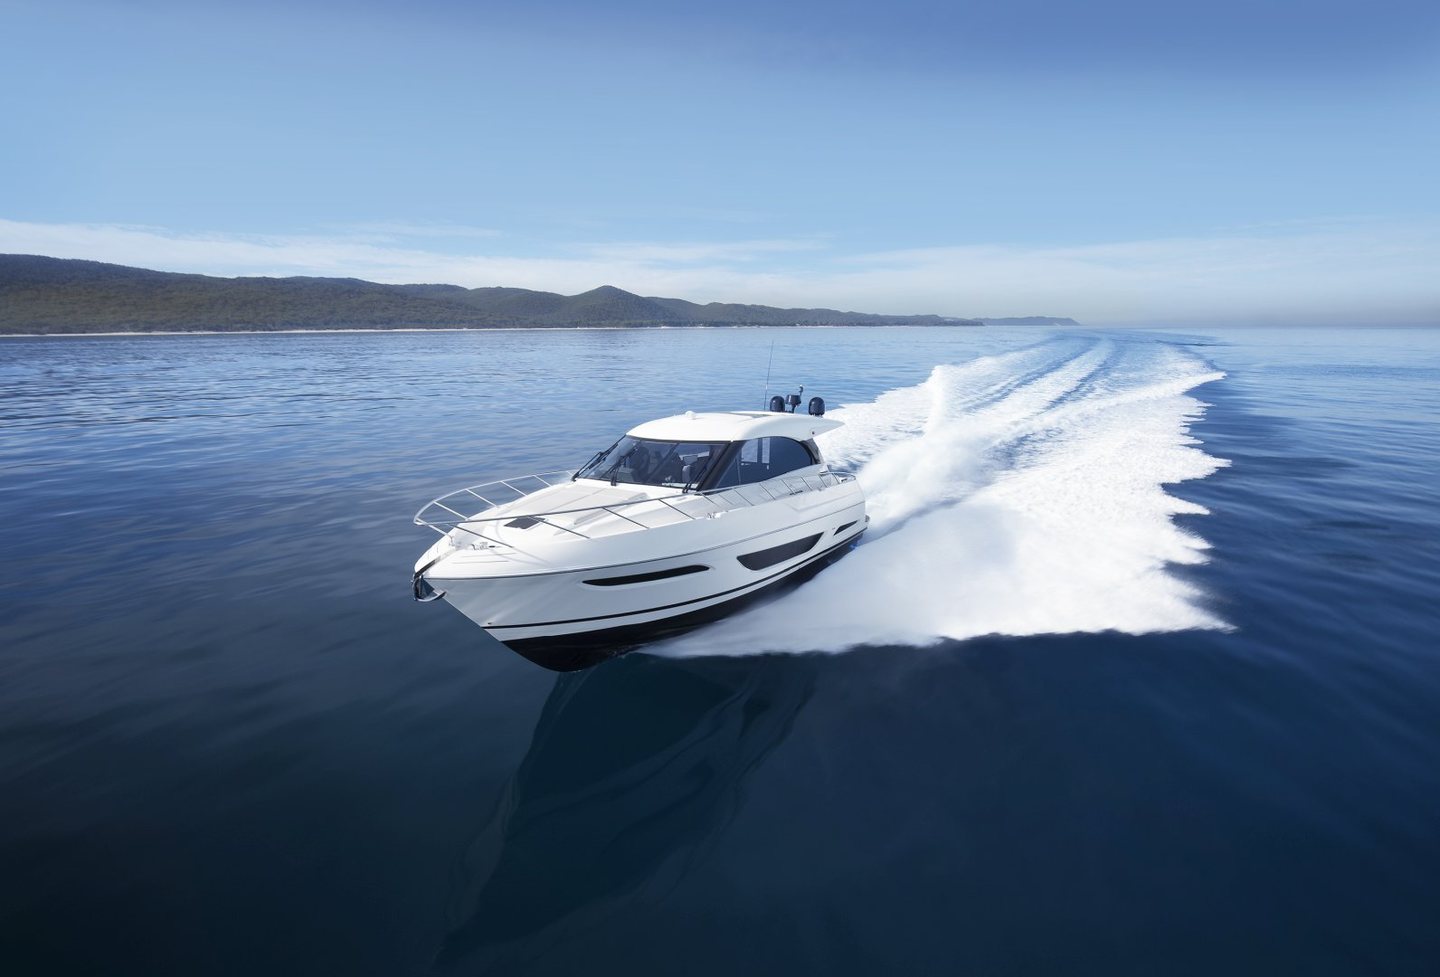 360 VR Virtual Tours of the Maritimo X50